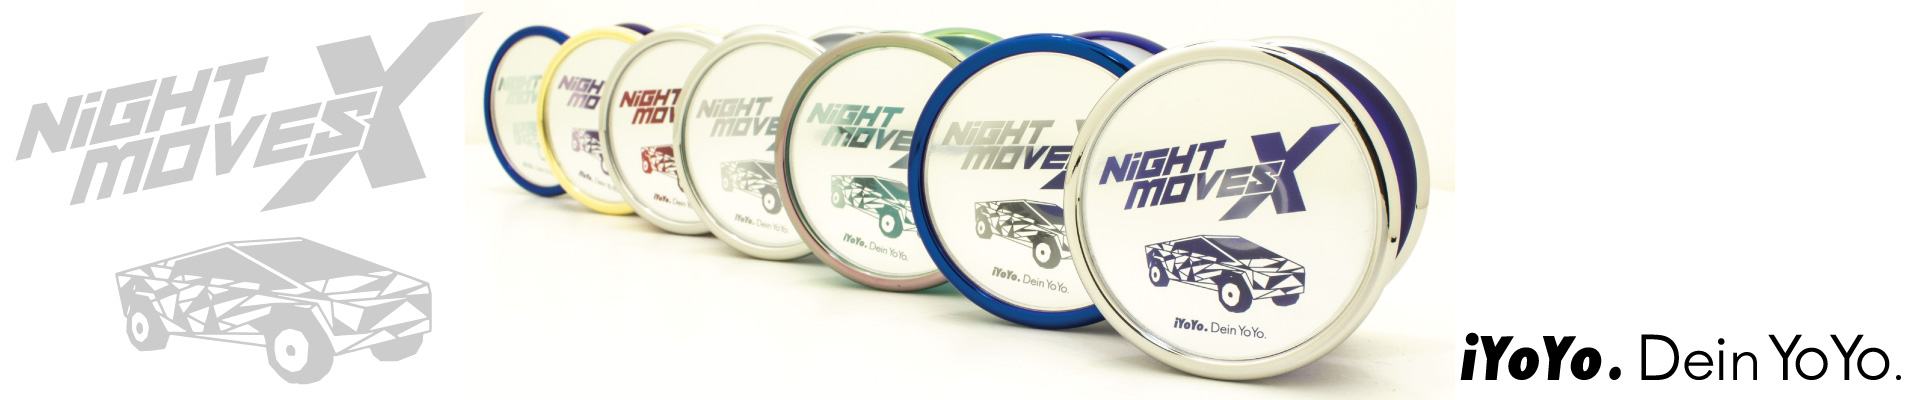 The iYoYo NiGHTMOVES X is now in the store